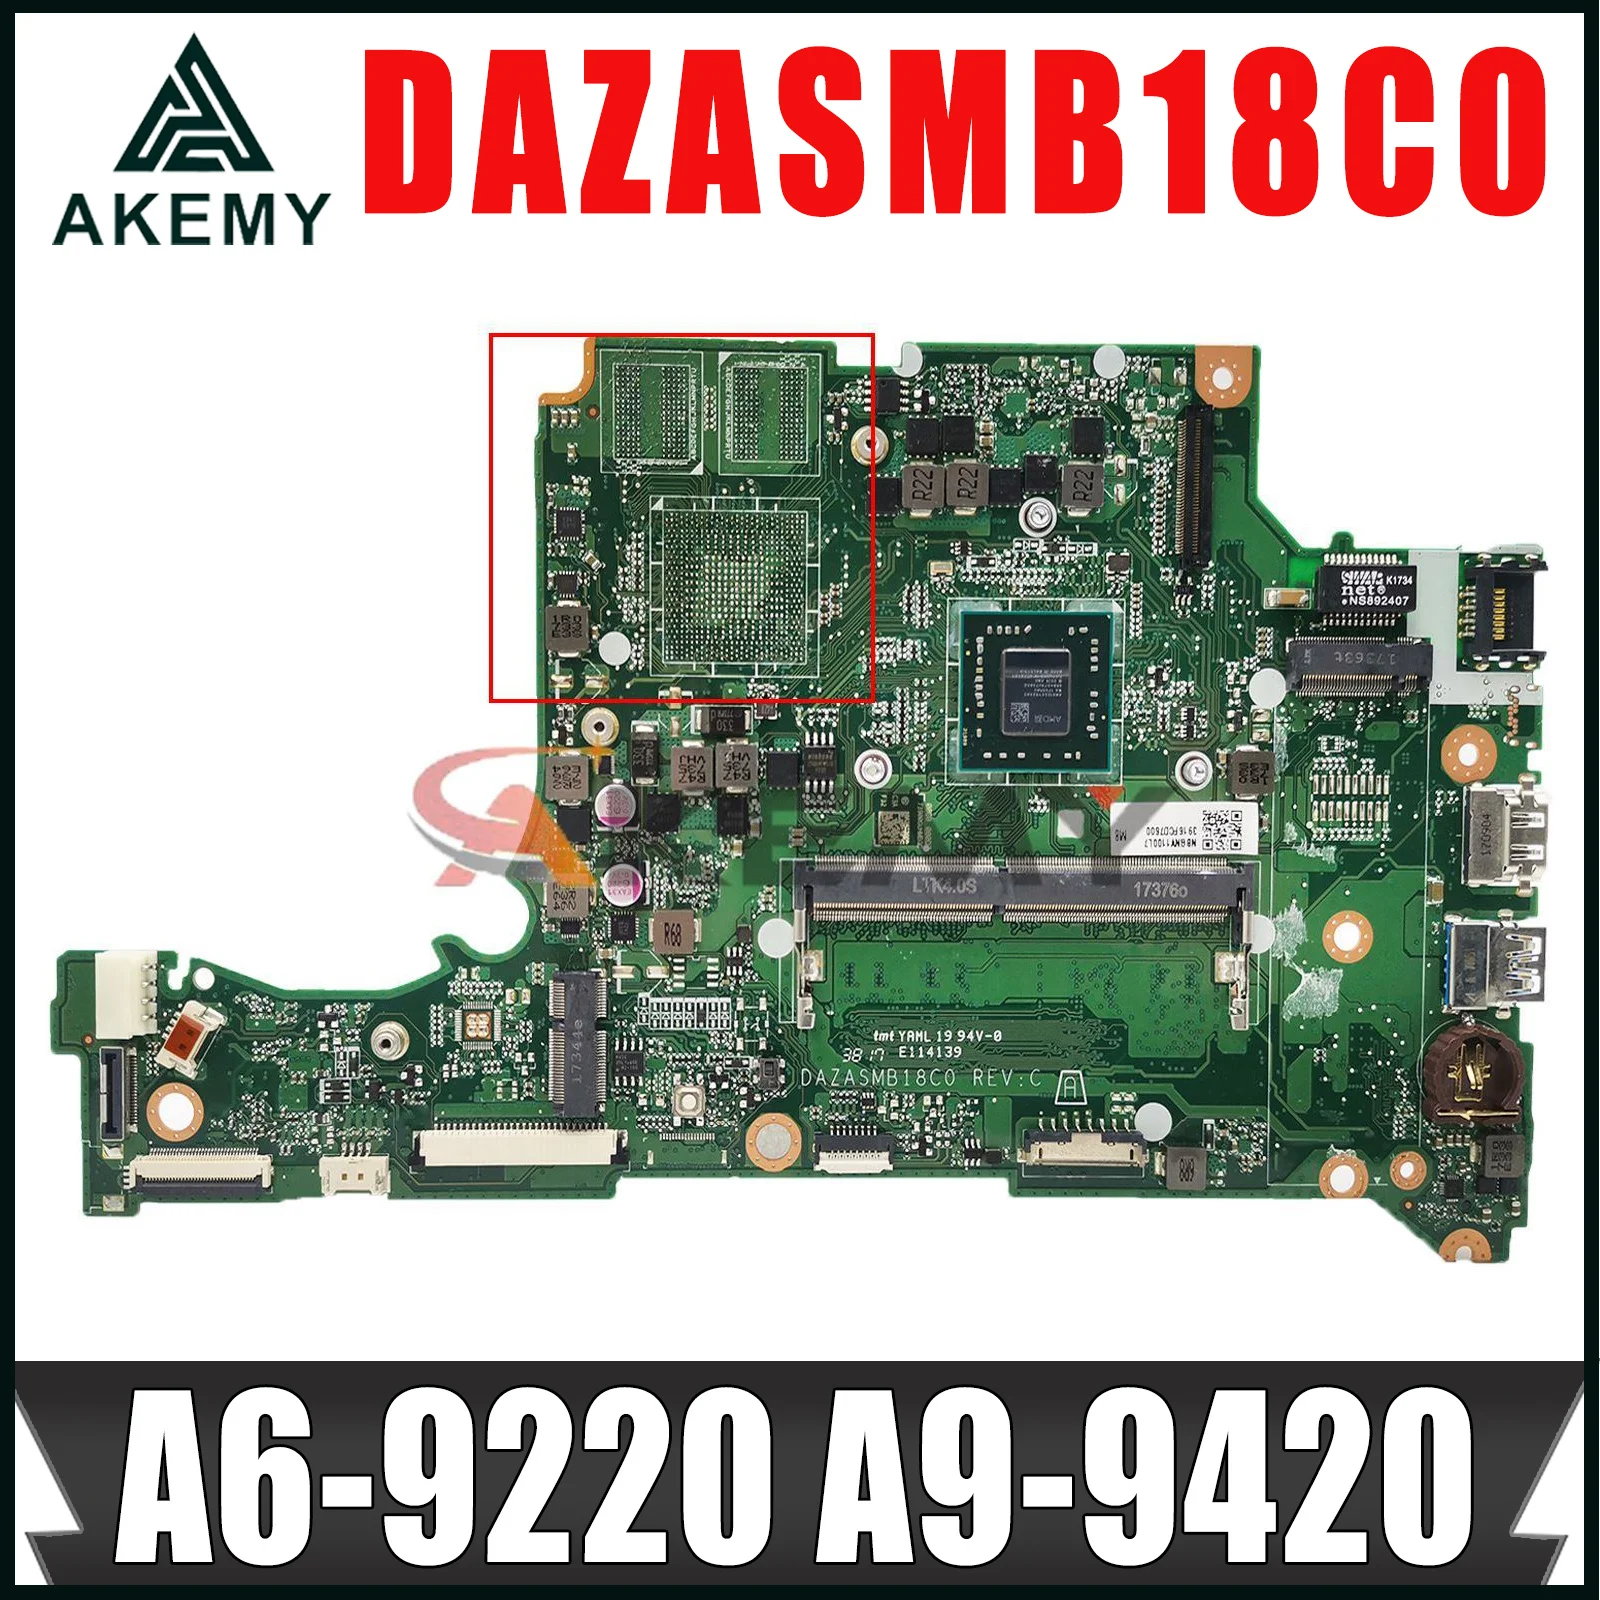 

DAZASMB18C0 ZAS For Acer Aspire A315-21G A315-31 Laptop Motherboard with A6-9220 A9-9420 CPU 4GB RAM Radeon 520 2GB 100% Tested